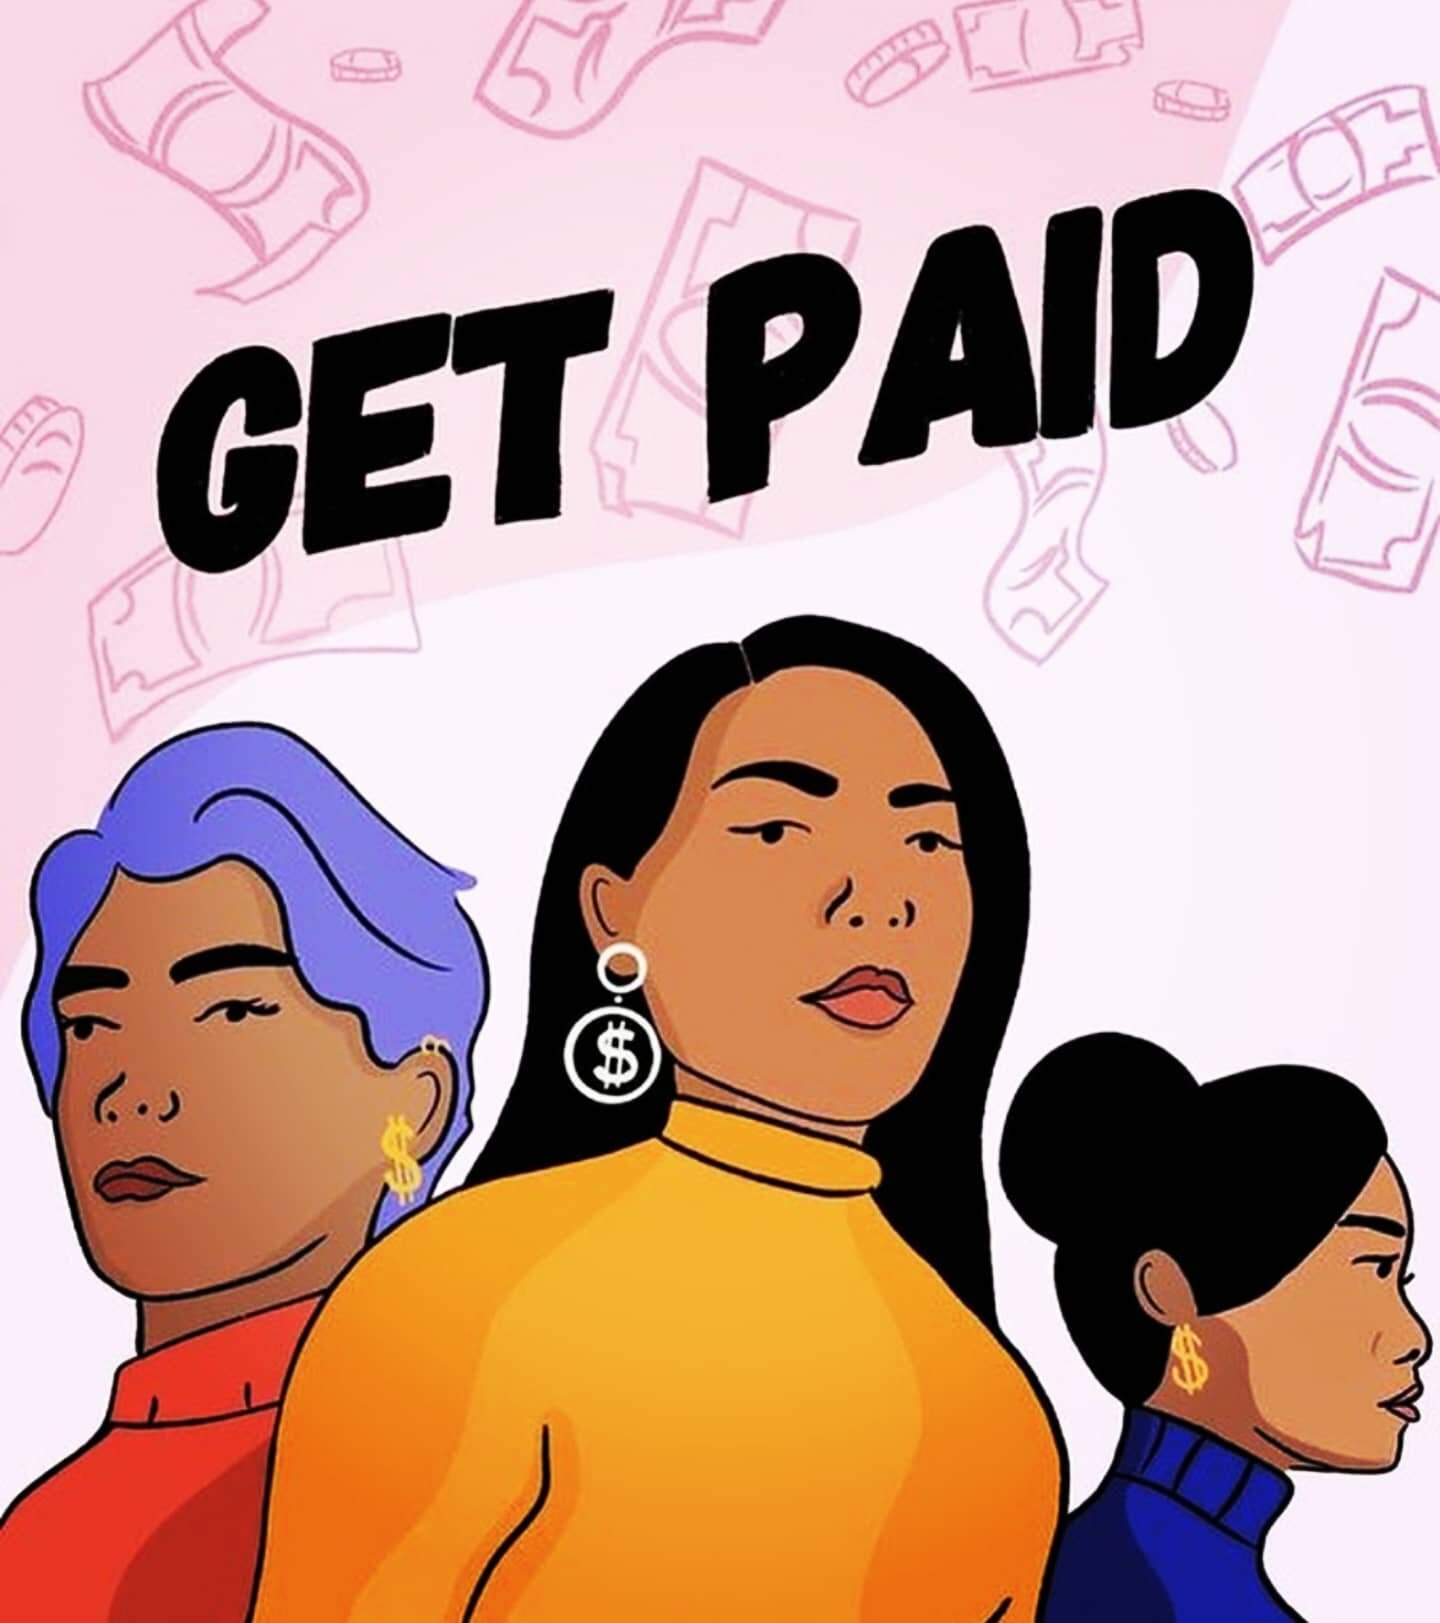 On average Asian American/ Pacific Islander (AAPI) women are paid $0.85 for every $1.00 a white non-Hispanic man earns. 

That means it takes AAPI women more than 14 months to catch up to what white, non-Hispanic men make in a year. 

A minimum wage 